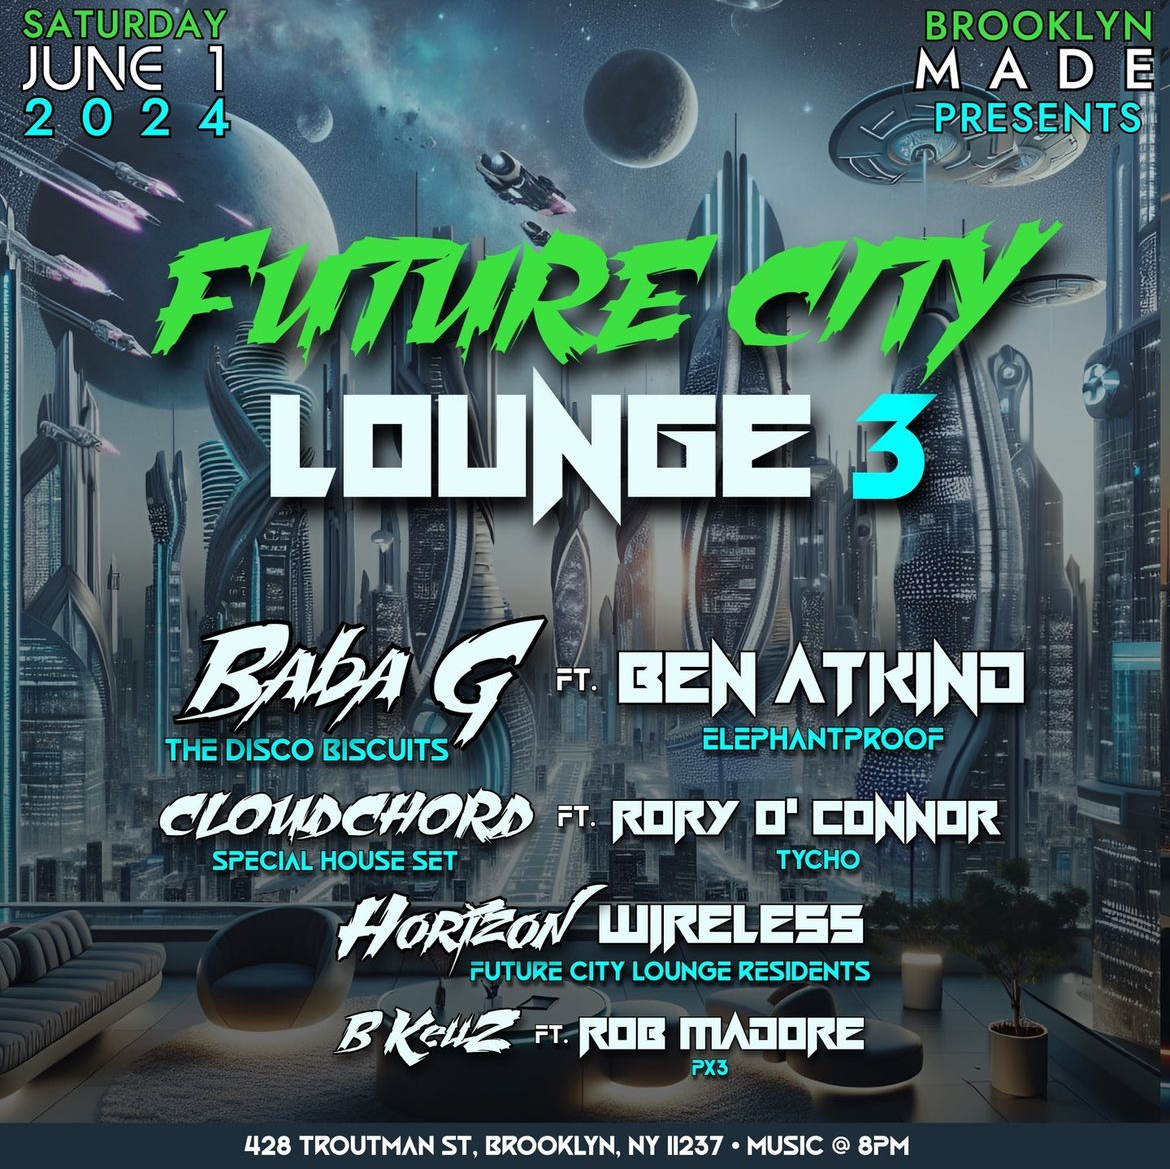 Future City Lounge 3: Baba G (@disco_biscuits) ft. Ben Atkind (ElephantProof), @Cloudchord ft. Rory O’ Connor (Tycho), Horizon Wireless, BKellZ, ft. Rob Madore (Px3) is on Saturday, June 1 at Brooklyn Made. Grab tickets: bit.ly/48Hag6J